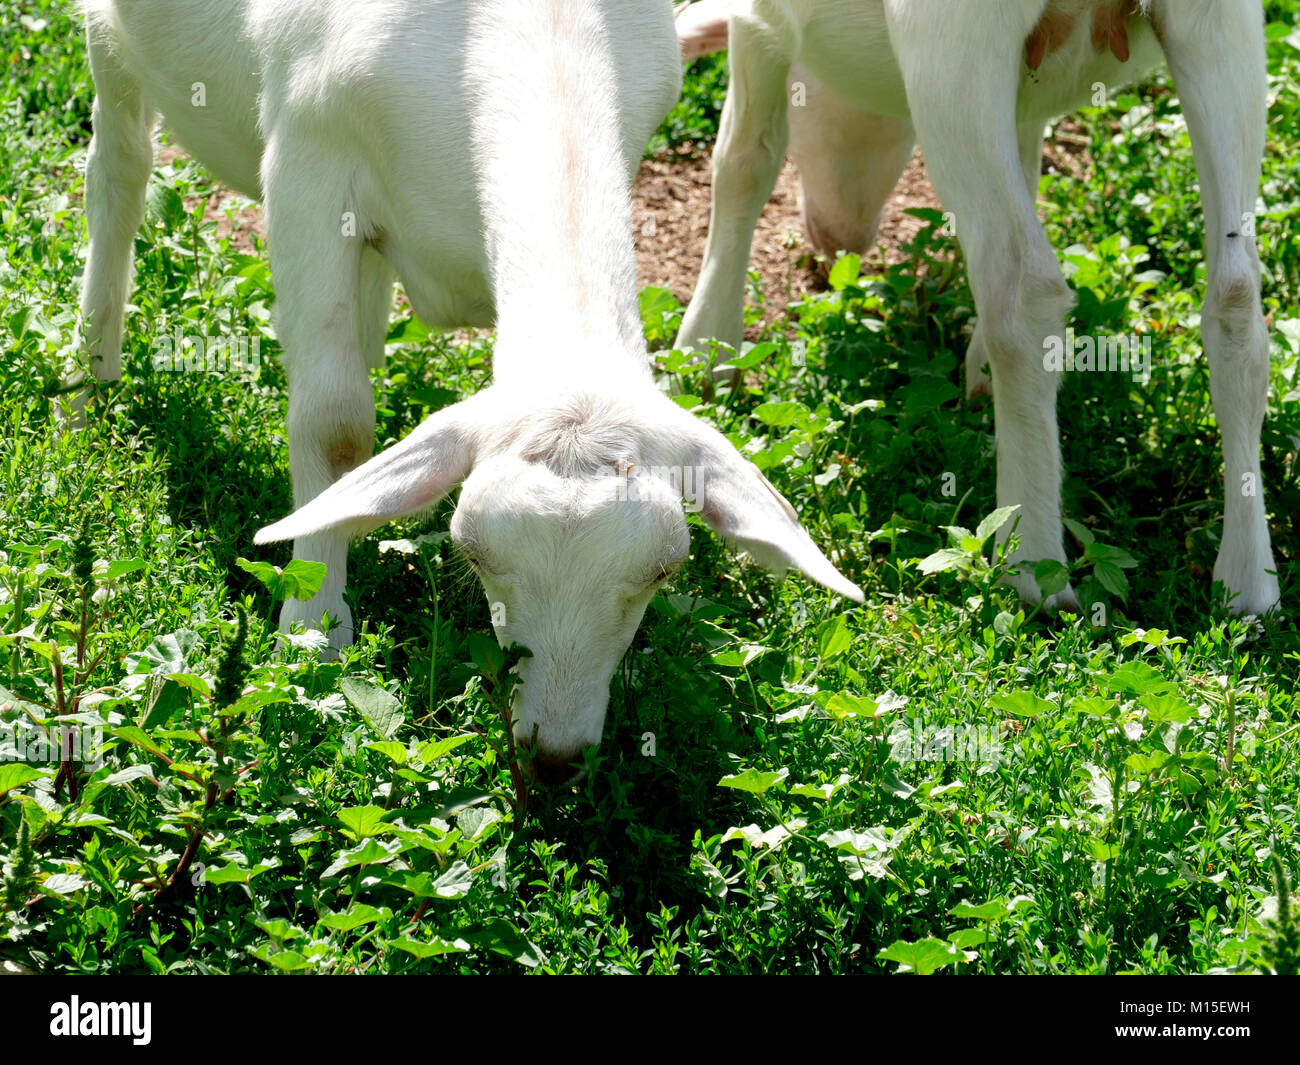 Two White Dairy Goats Eating Grass on a Farm Stock Photo